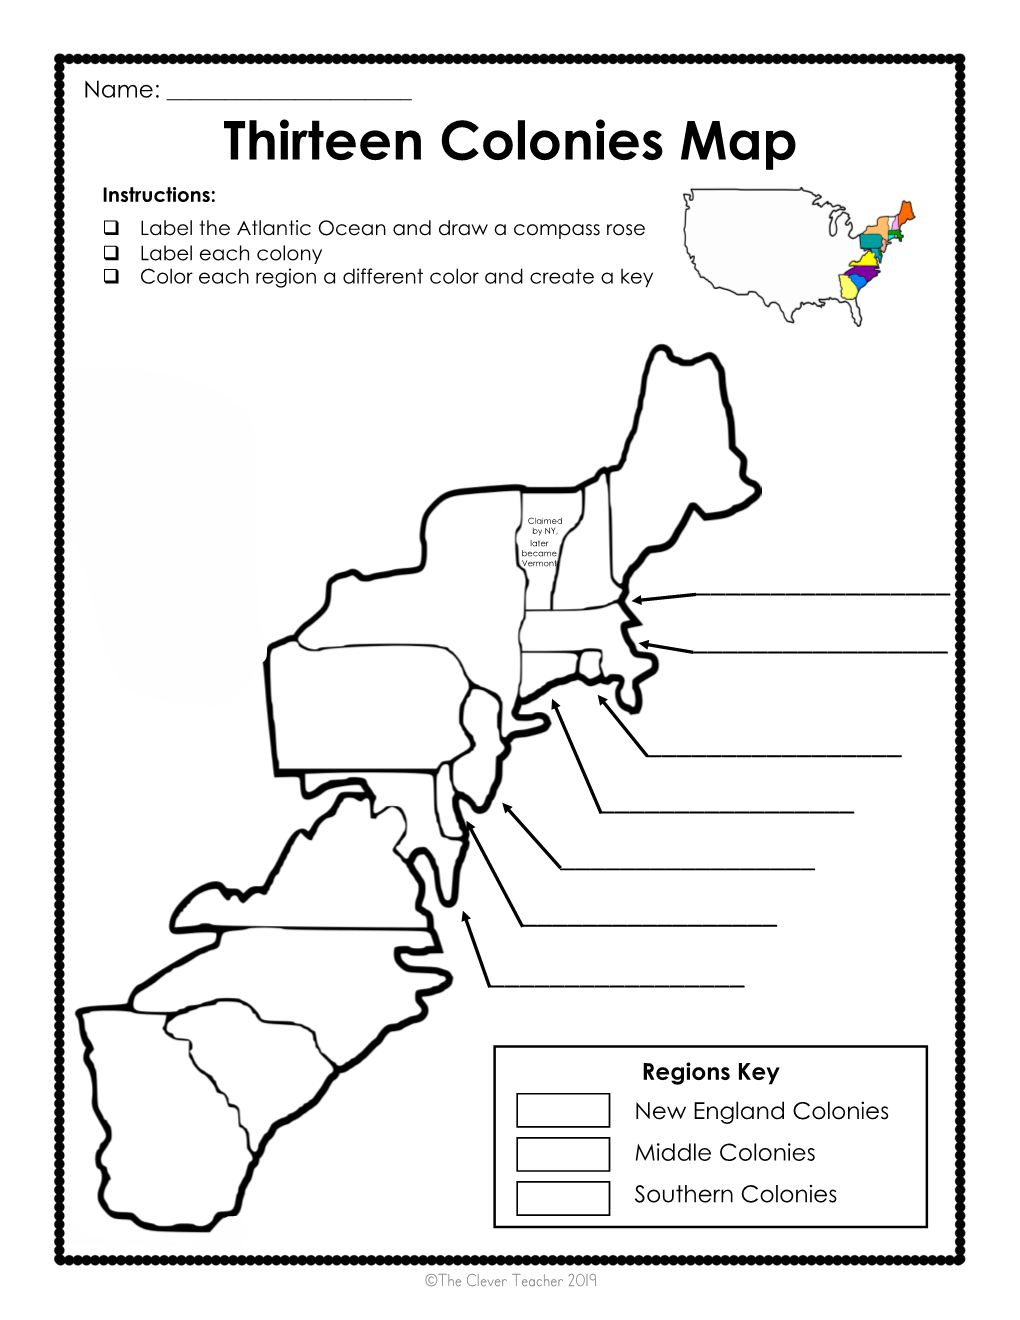 Thirteen Colonies Map Instructions: Q Label the Atlantic Ocean and Draw a Compass Rose Q Label Each Colony Q Color Each Region a Different Color and Create a Key